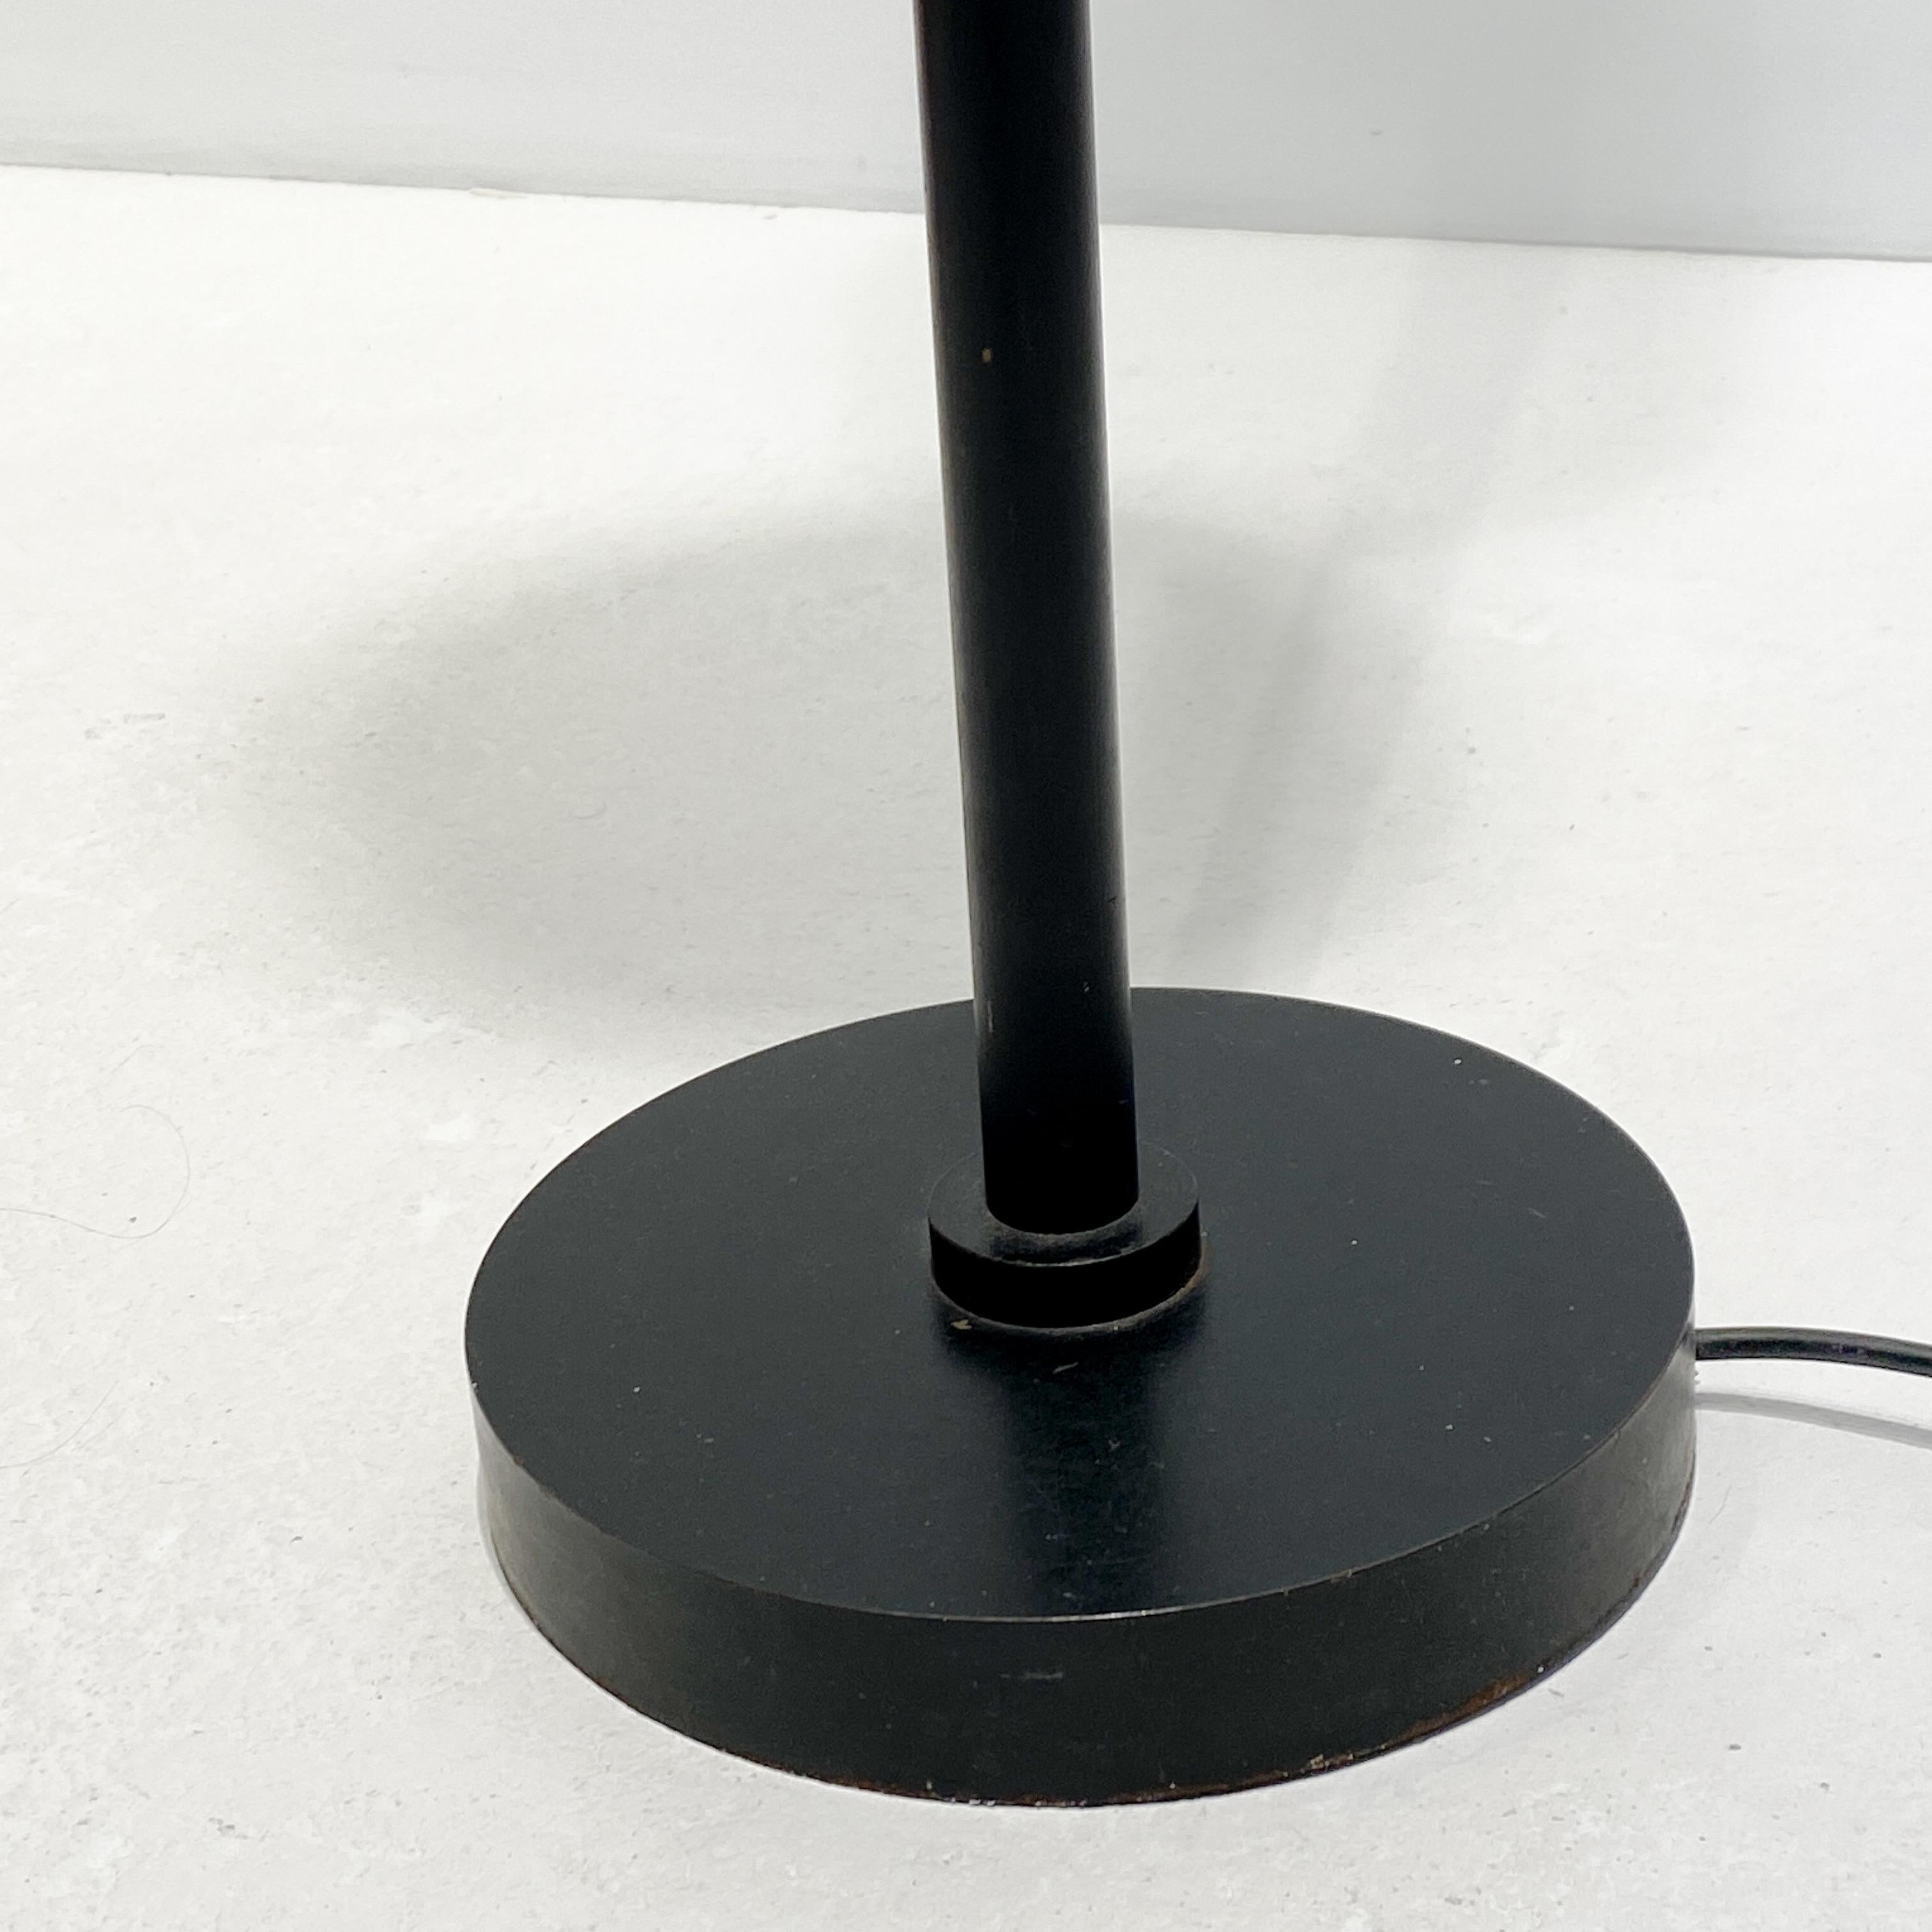 Wim den Boon, black one-off floorlamp icw Gispen, midcentury modern design 1950s In Good Condition For Sale In AMSTERDAM, NL